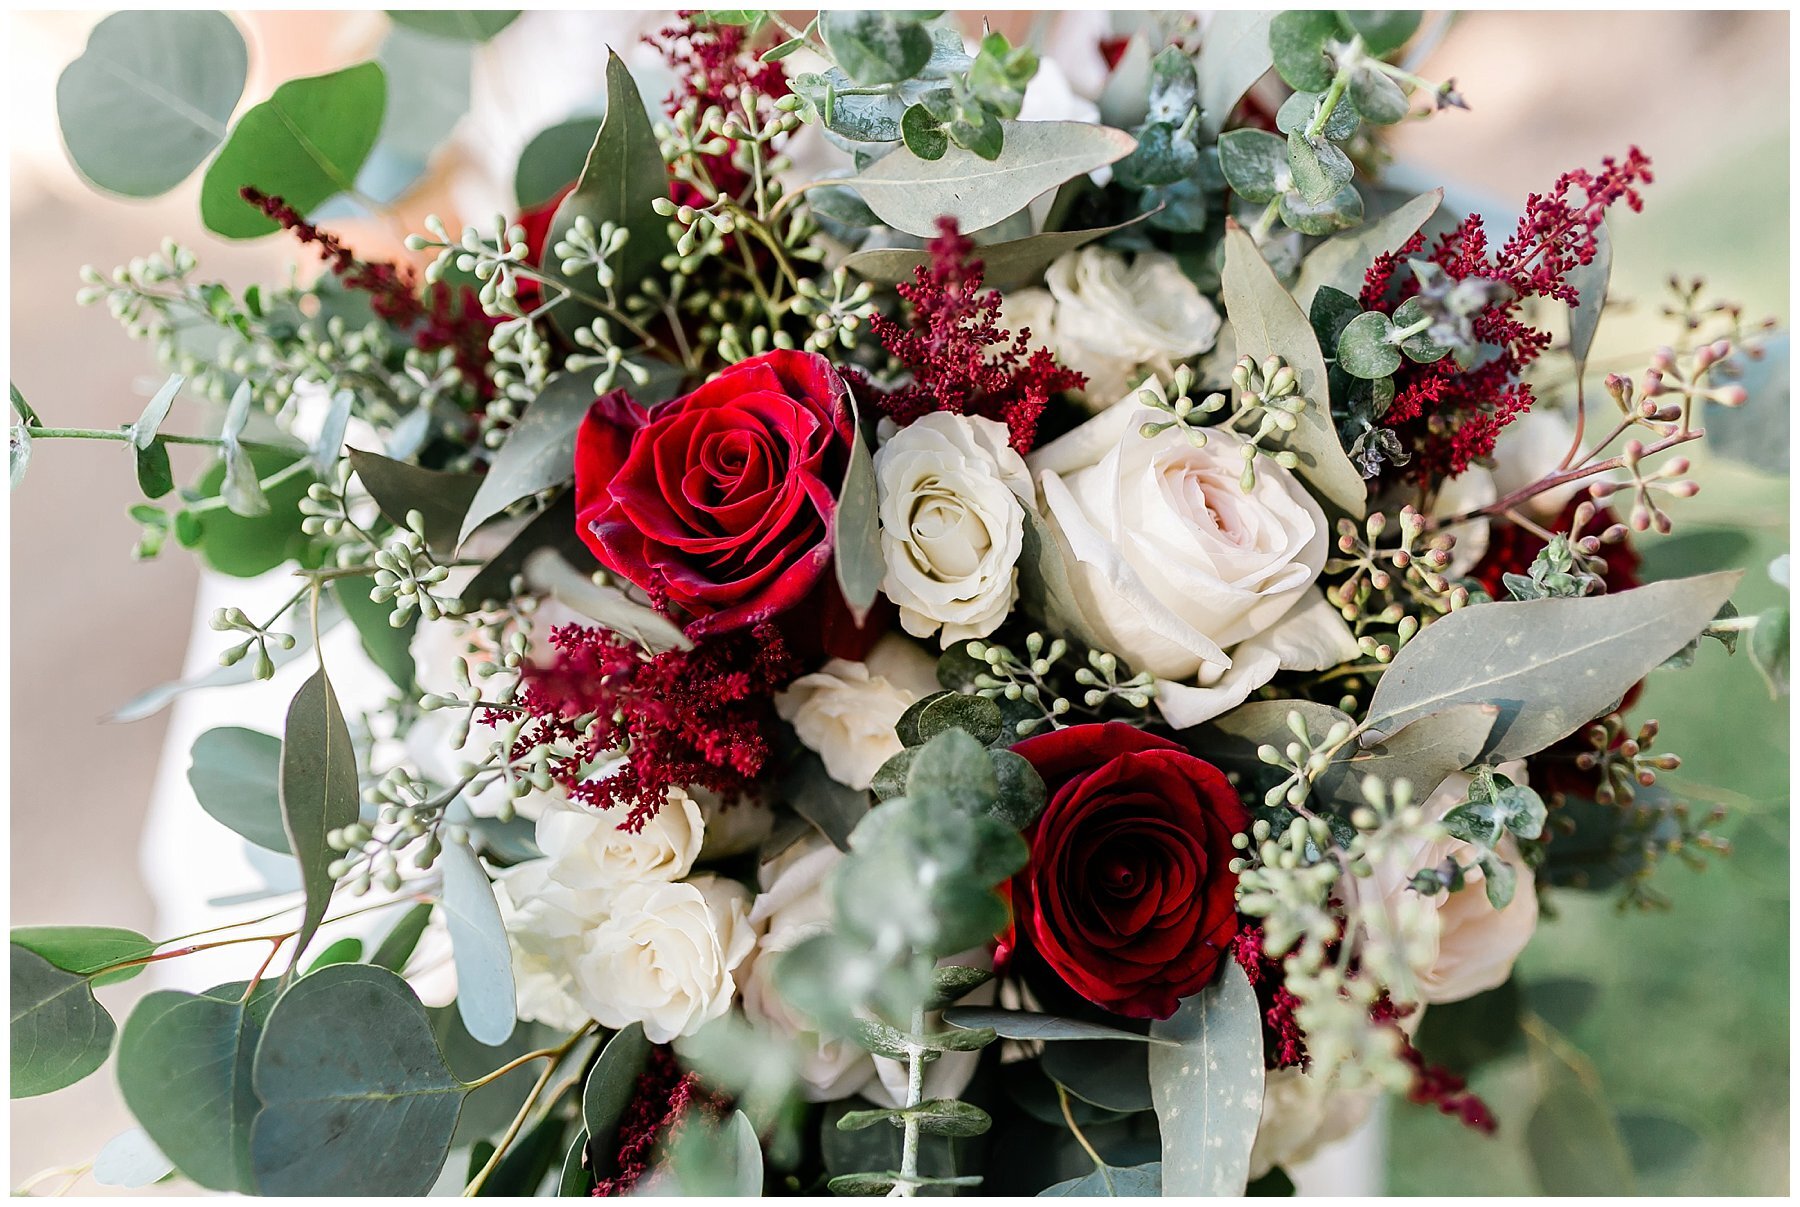  bouquet of red and white roses 